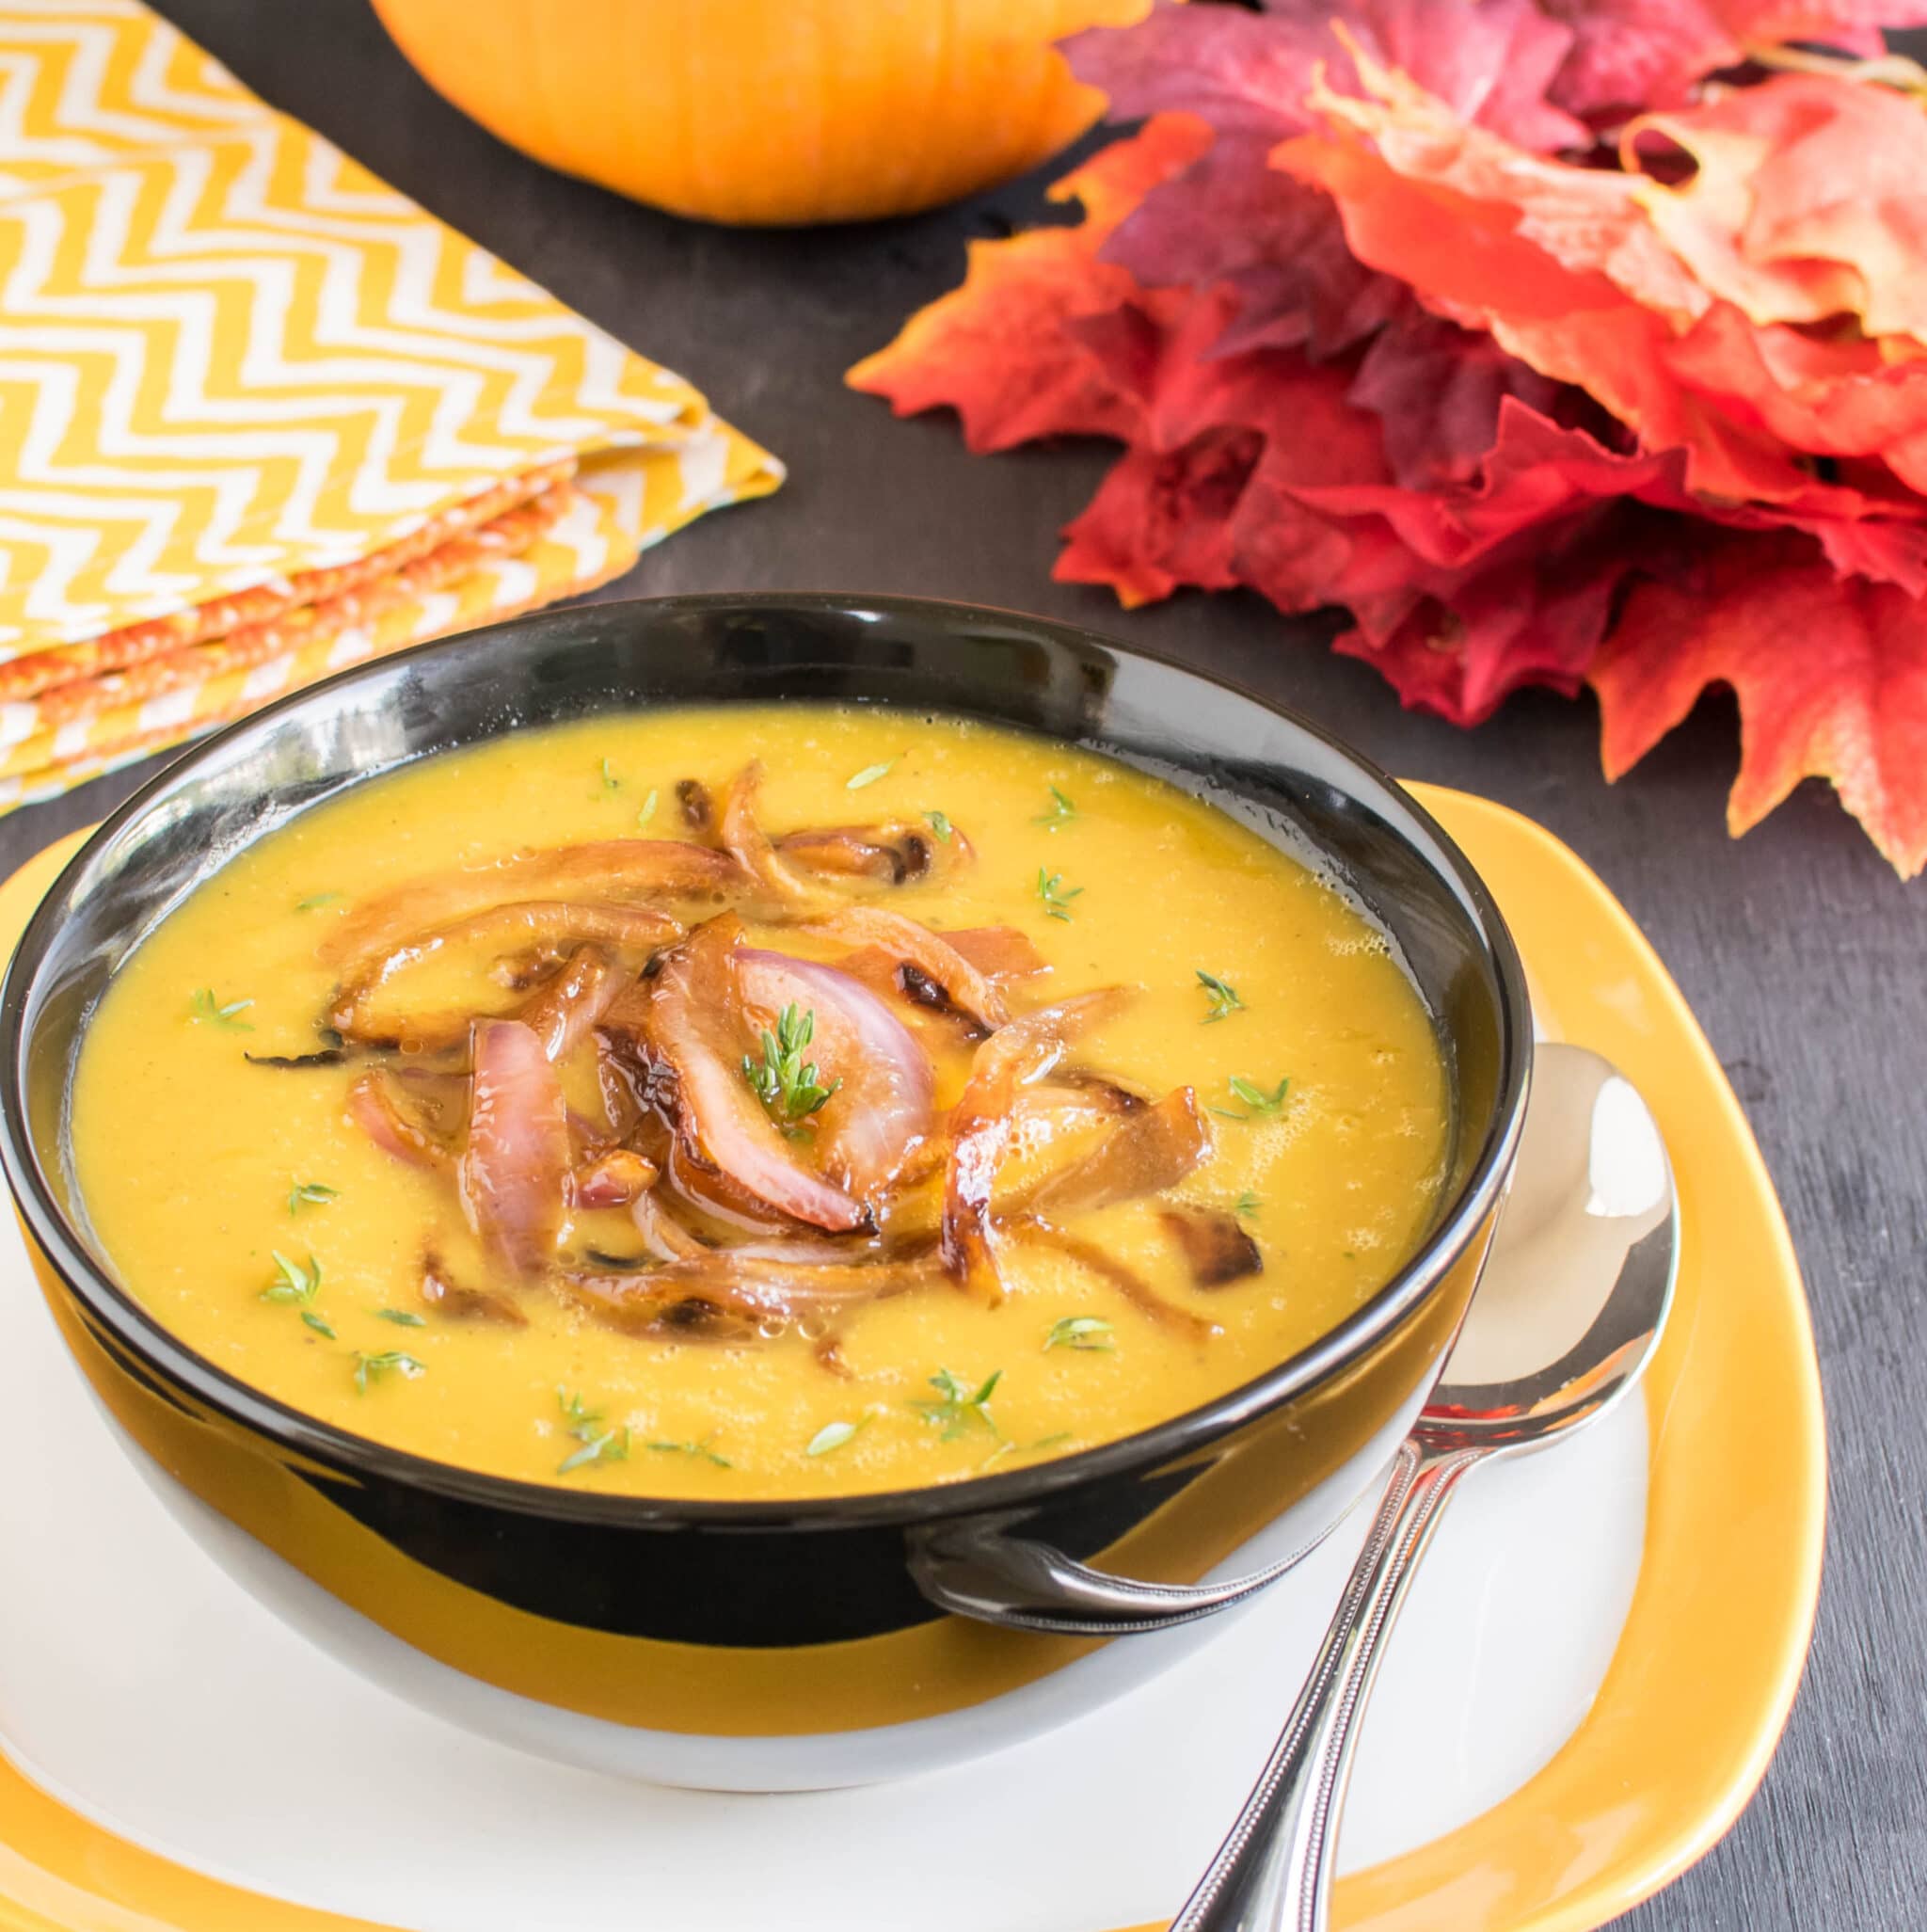 A 45 degree angle view of Apple Pumpkin Soup with Caramelized Onions